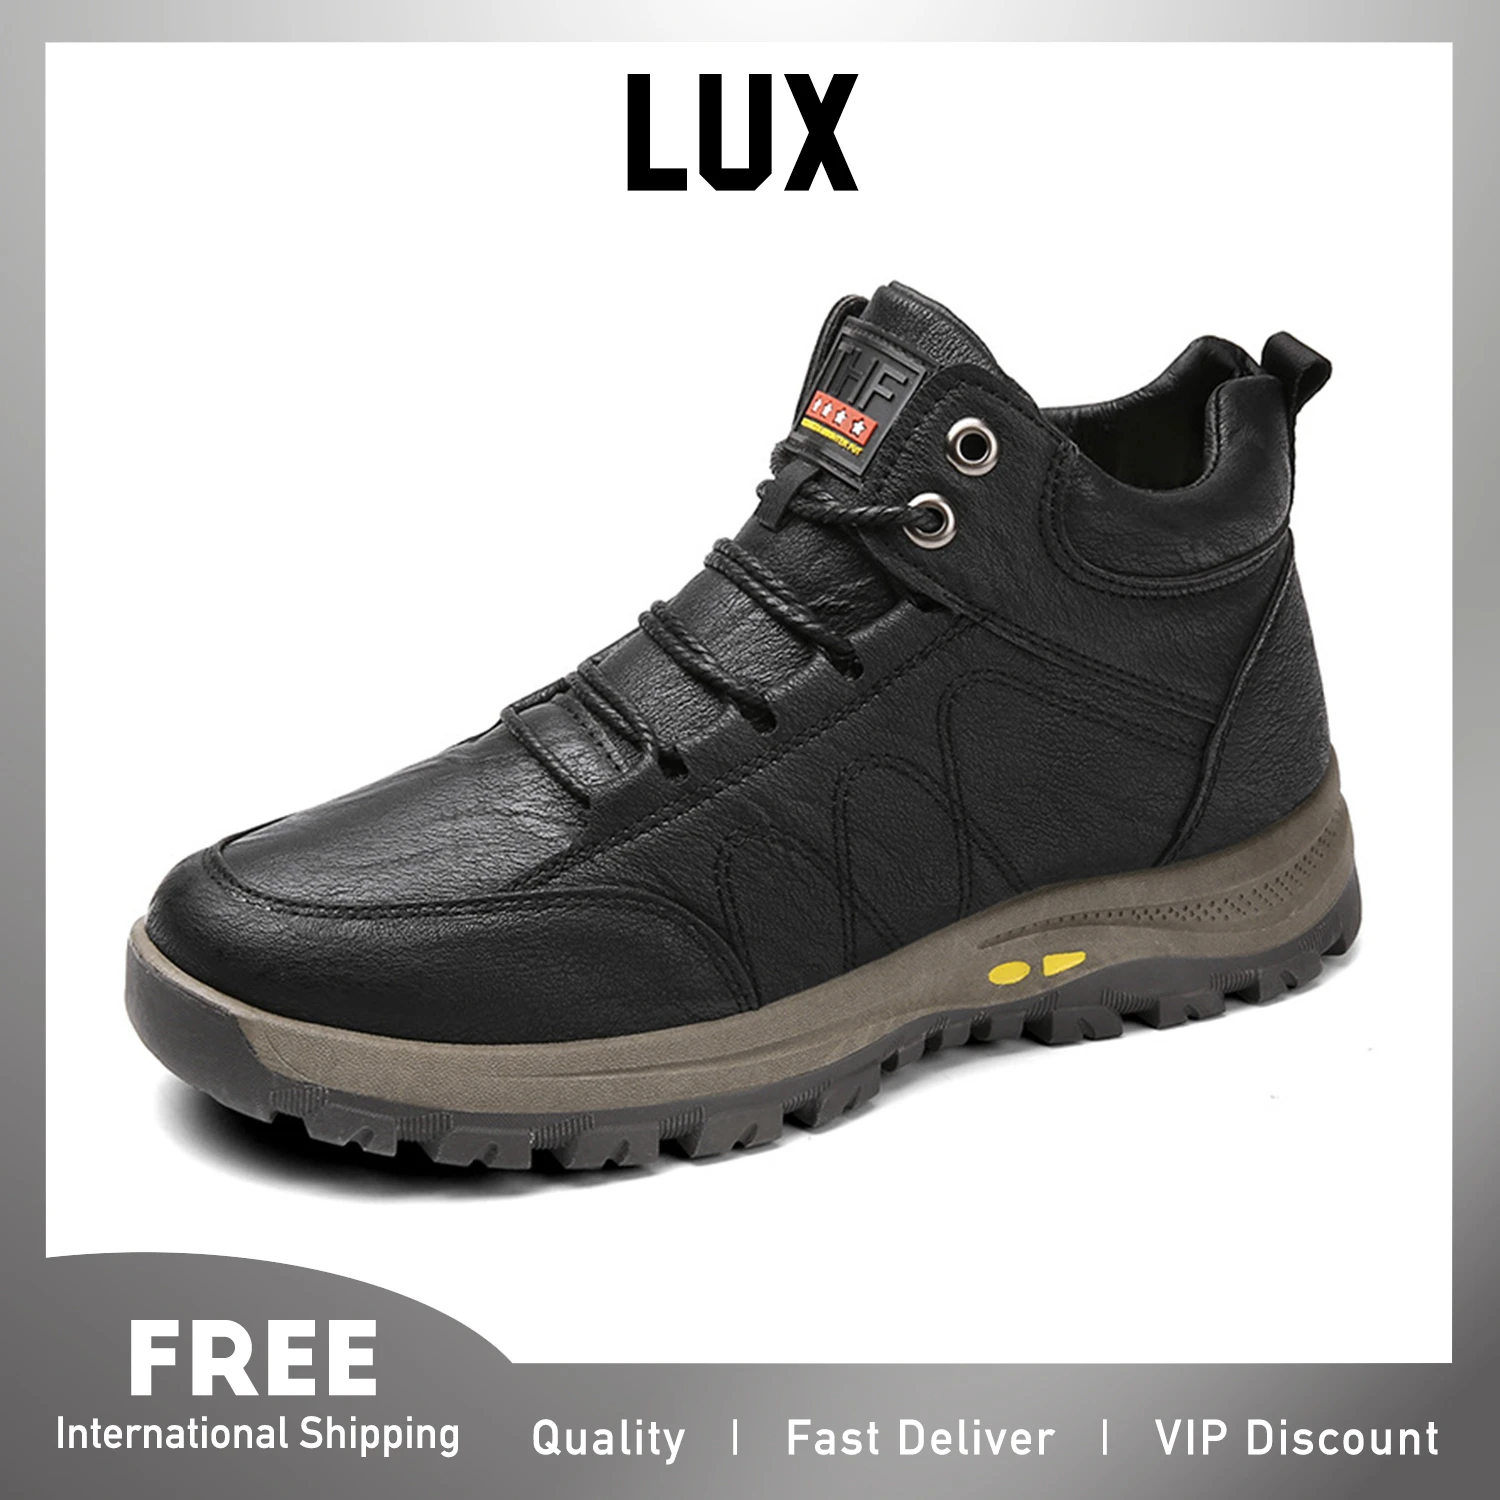 Lux Winter Men's Safety Shoes Outdoor Working Industrial Outfit Waterproof  Fur Warm Snow Boots For Men - Men's Boots - AliExpress